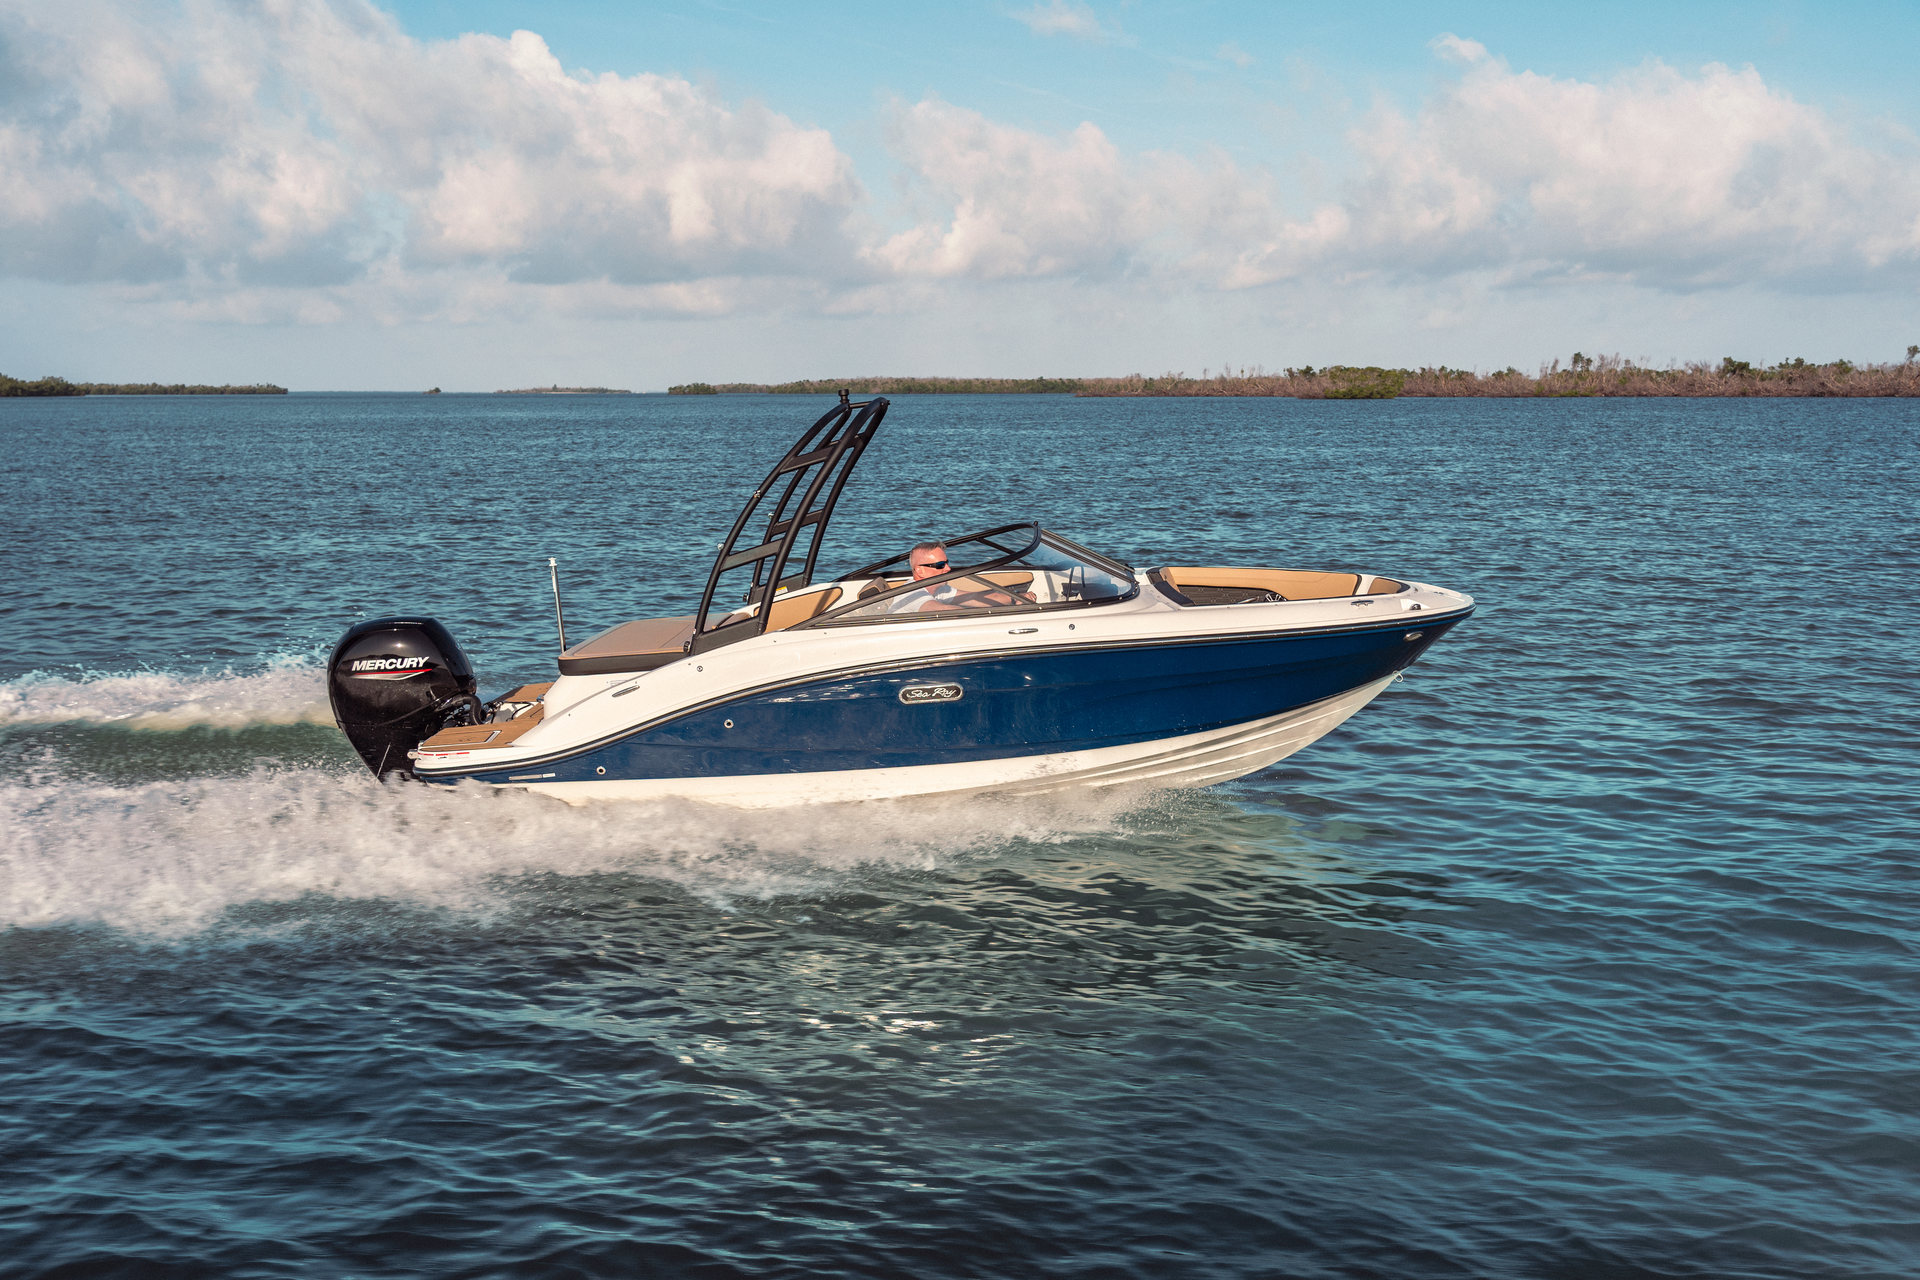 360 VR Virtual Tours of the Sea Ray SPX 190 Outboard